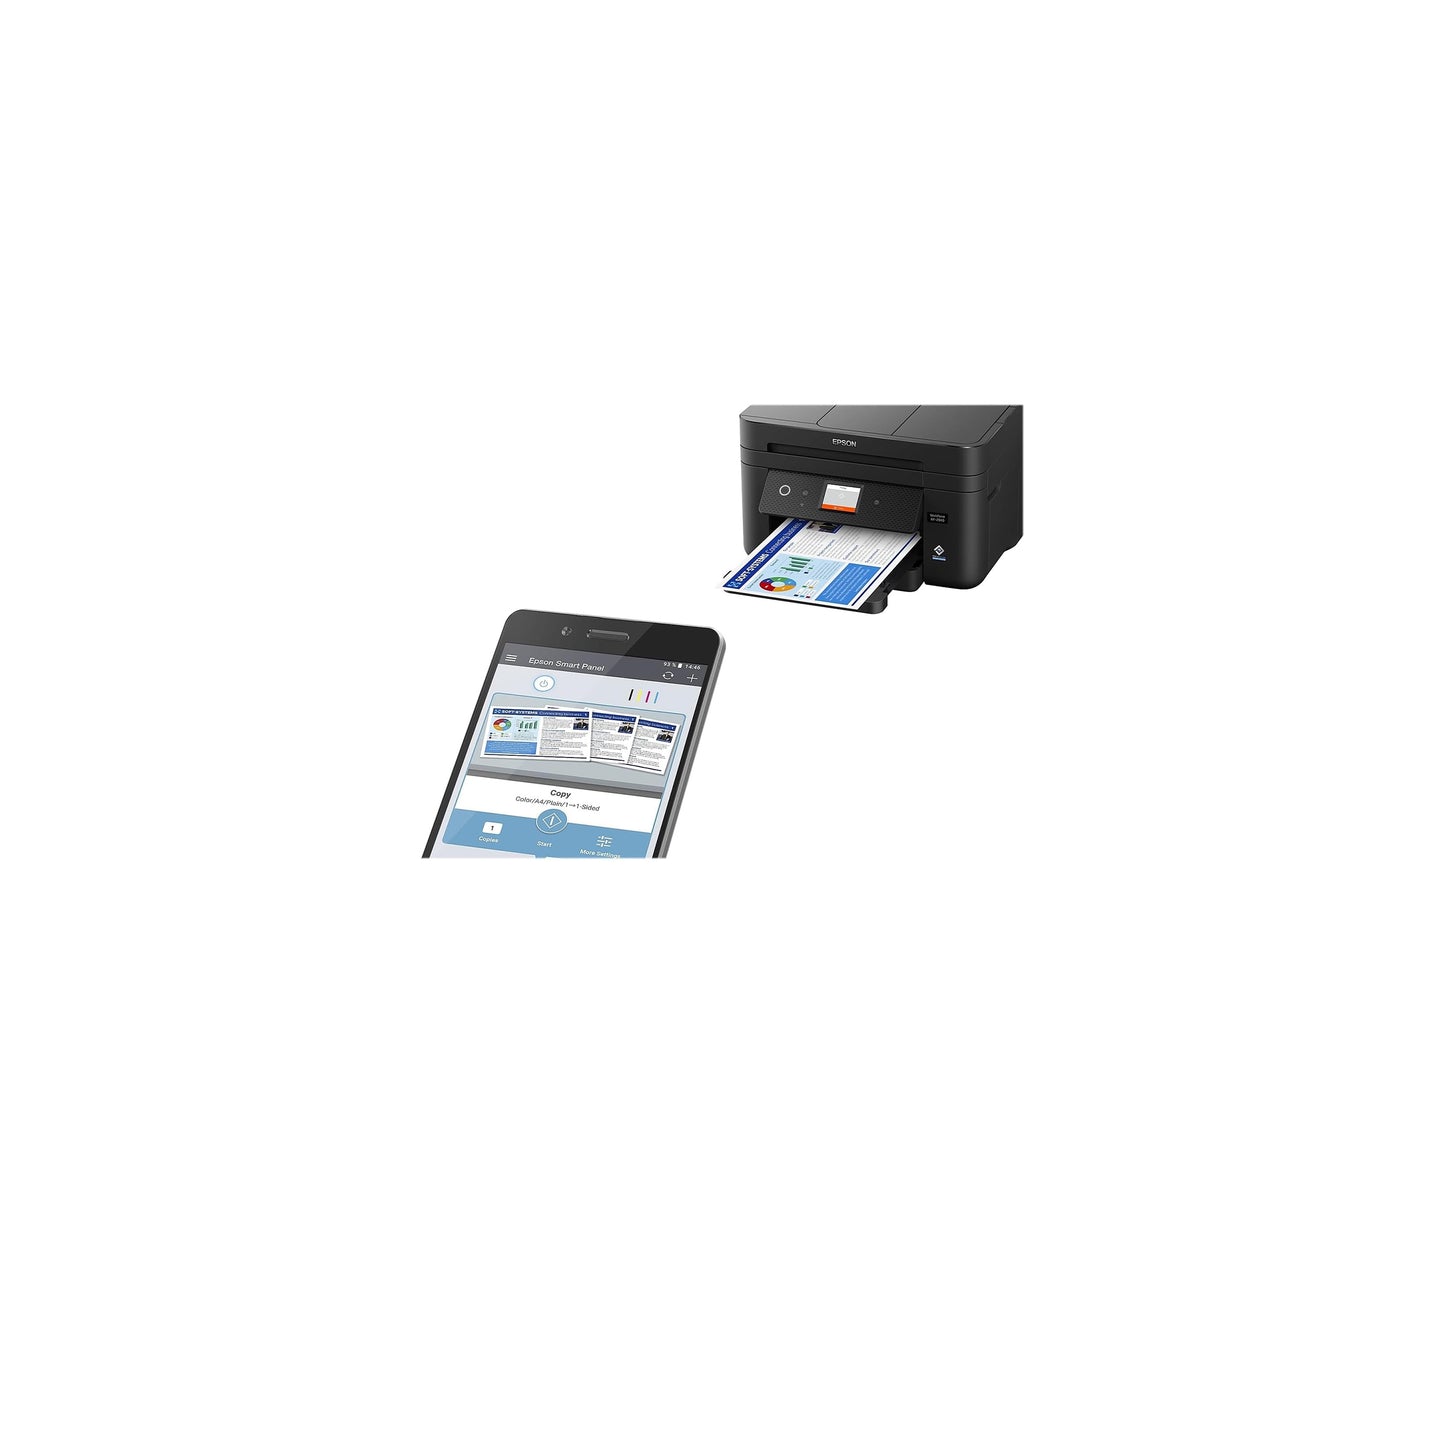 Epson Workforce WF-2960 Wireless All-in-One Printer with Scan, Copy, Fax, Auto Document Feeder, Automatic 2-Sided Printing, 2.4" Touchscreen Display, 150-Sheet Paper Tray and Ethernet,Black